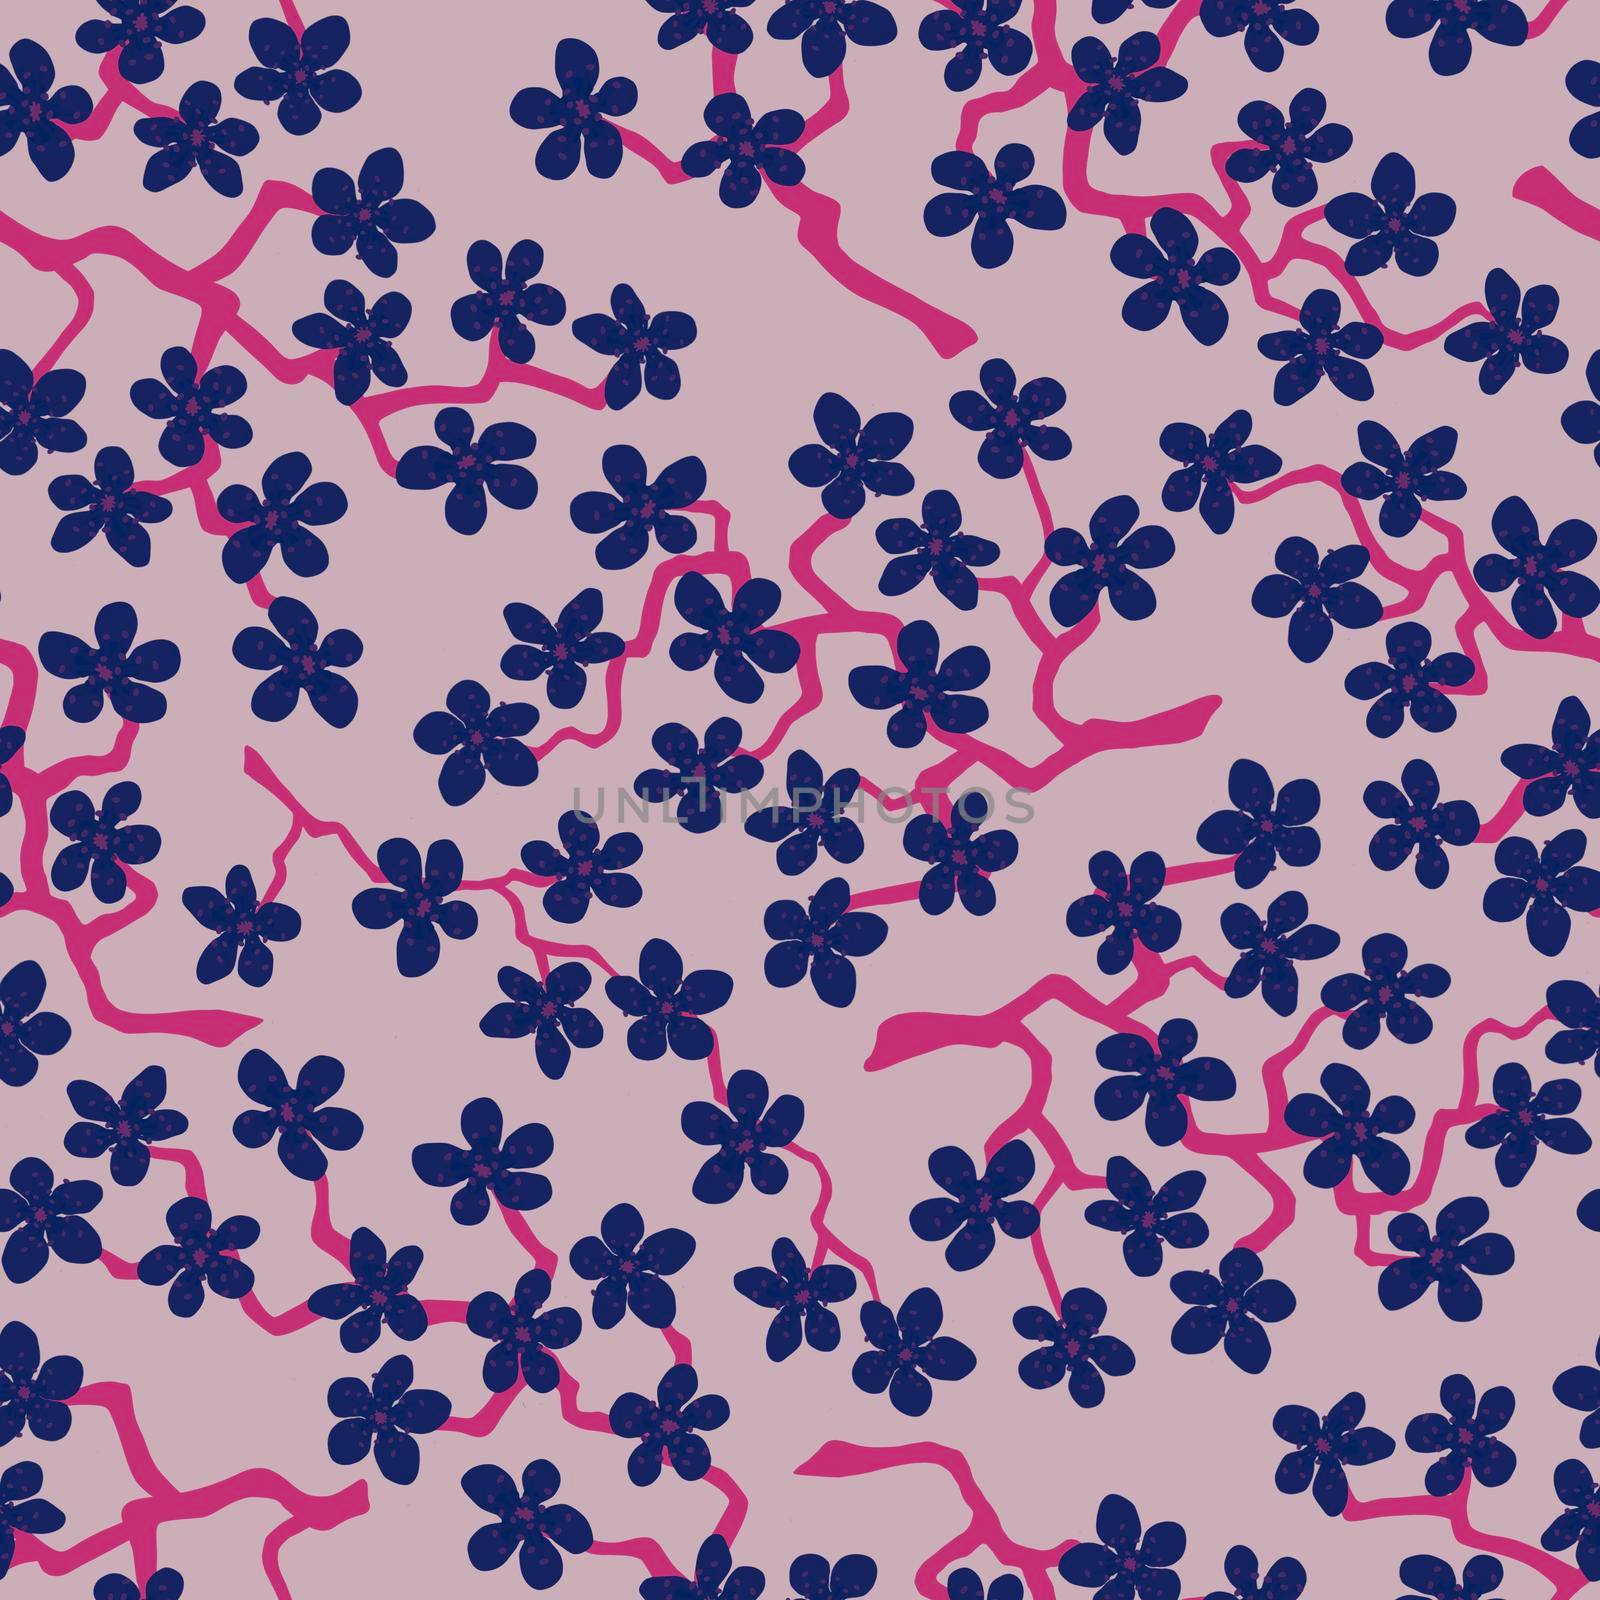 Seamless pattern with blossoming Japanese cherry sakura branches for fabric,packaging,wallpaper,textile decor,design, invitations,cards,print,gift wrap,manufacturing.Blue flowers on pink background